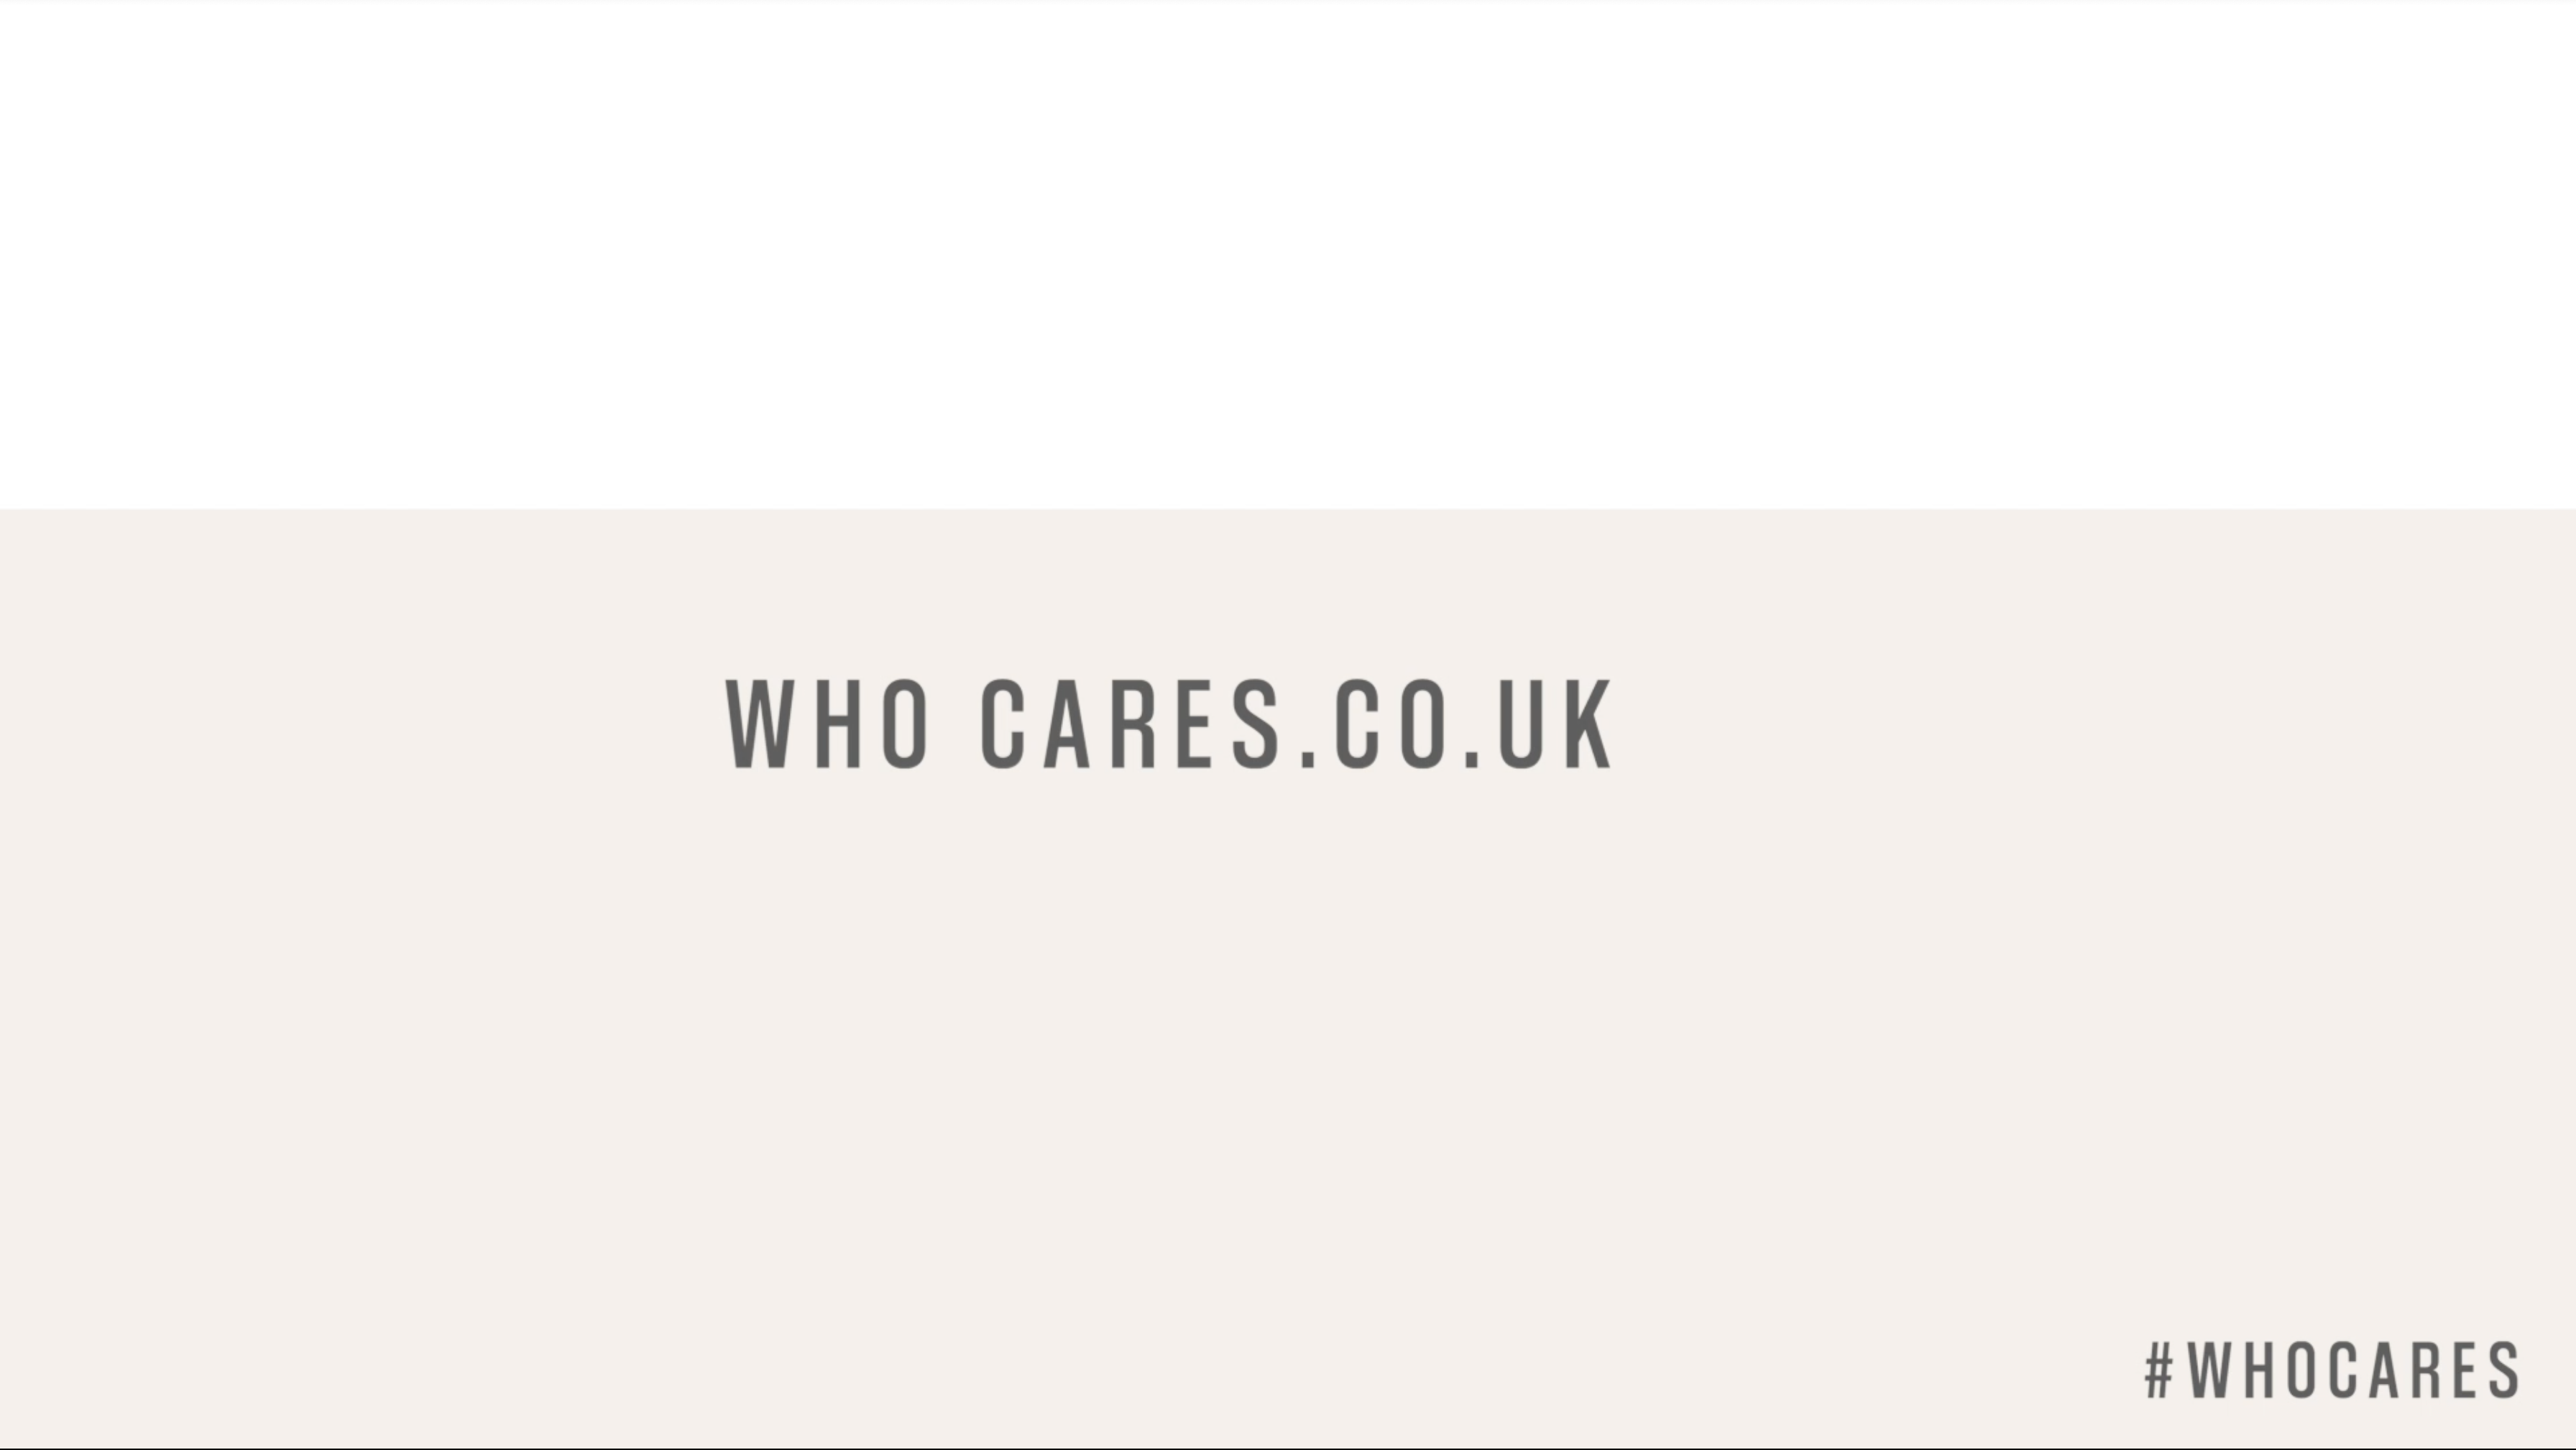 BA Graphic Communication work by Anais Carla Smith showing a touching campaign video for the Who Cares campaign.